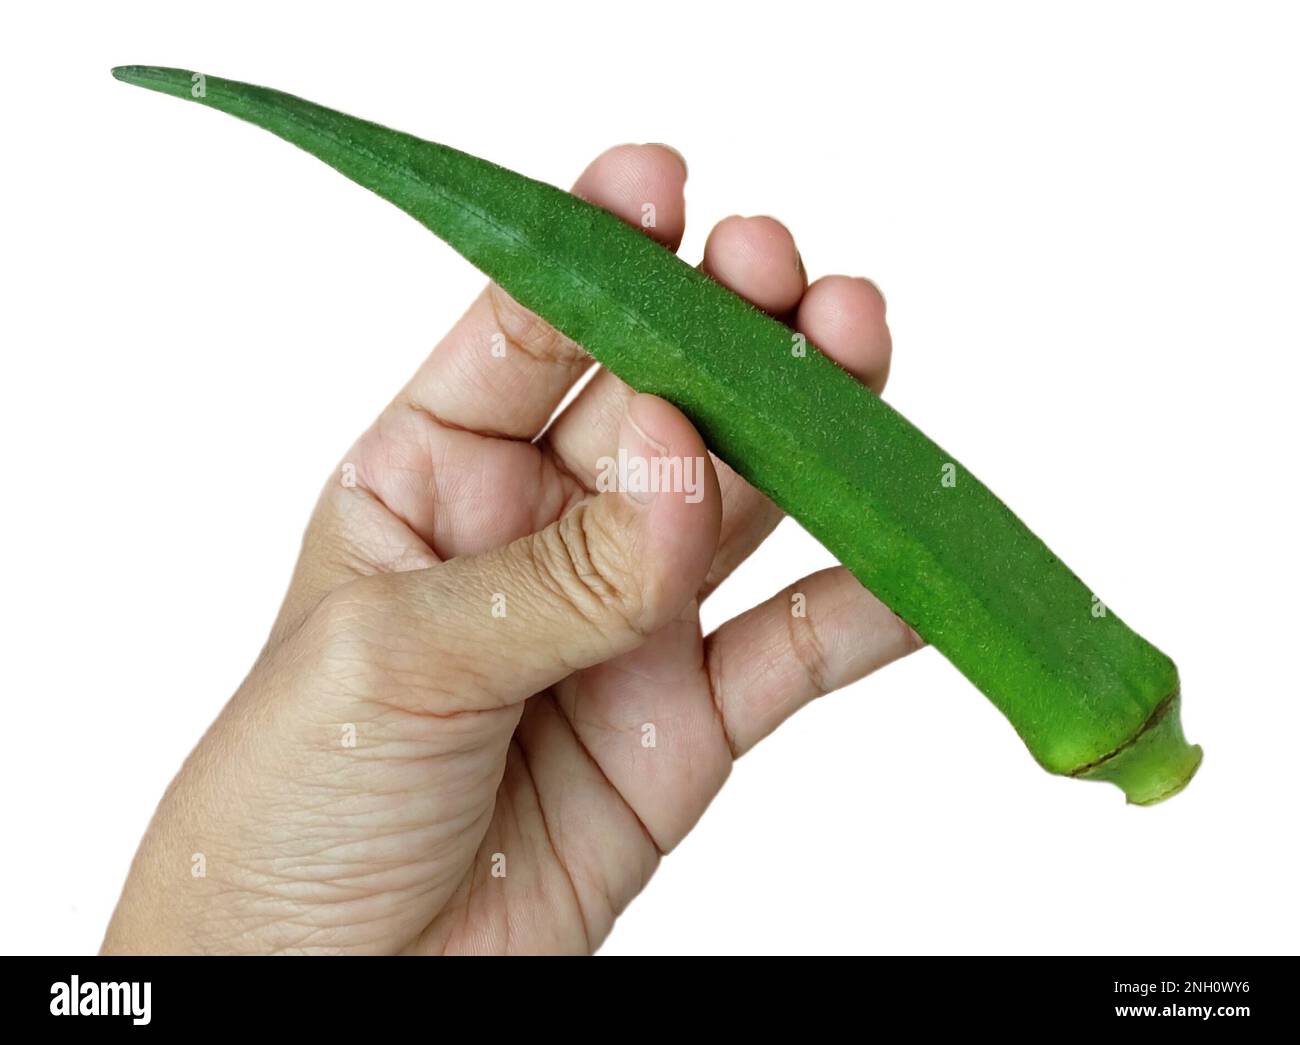 Vegetable and Herb, Hand Holding Okra or Lady Finger Fruits Preparing for Cooking. Stock Photo